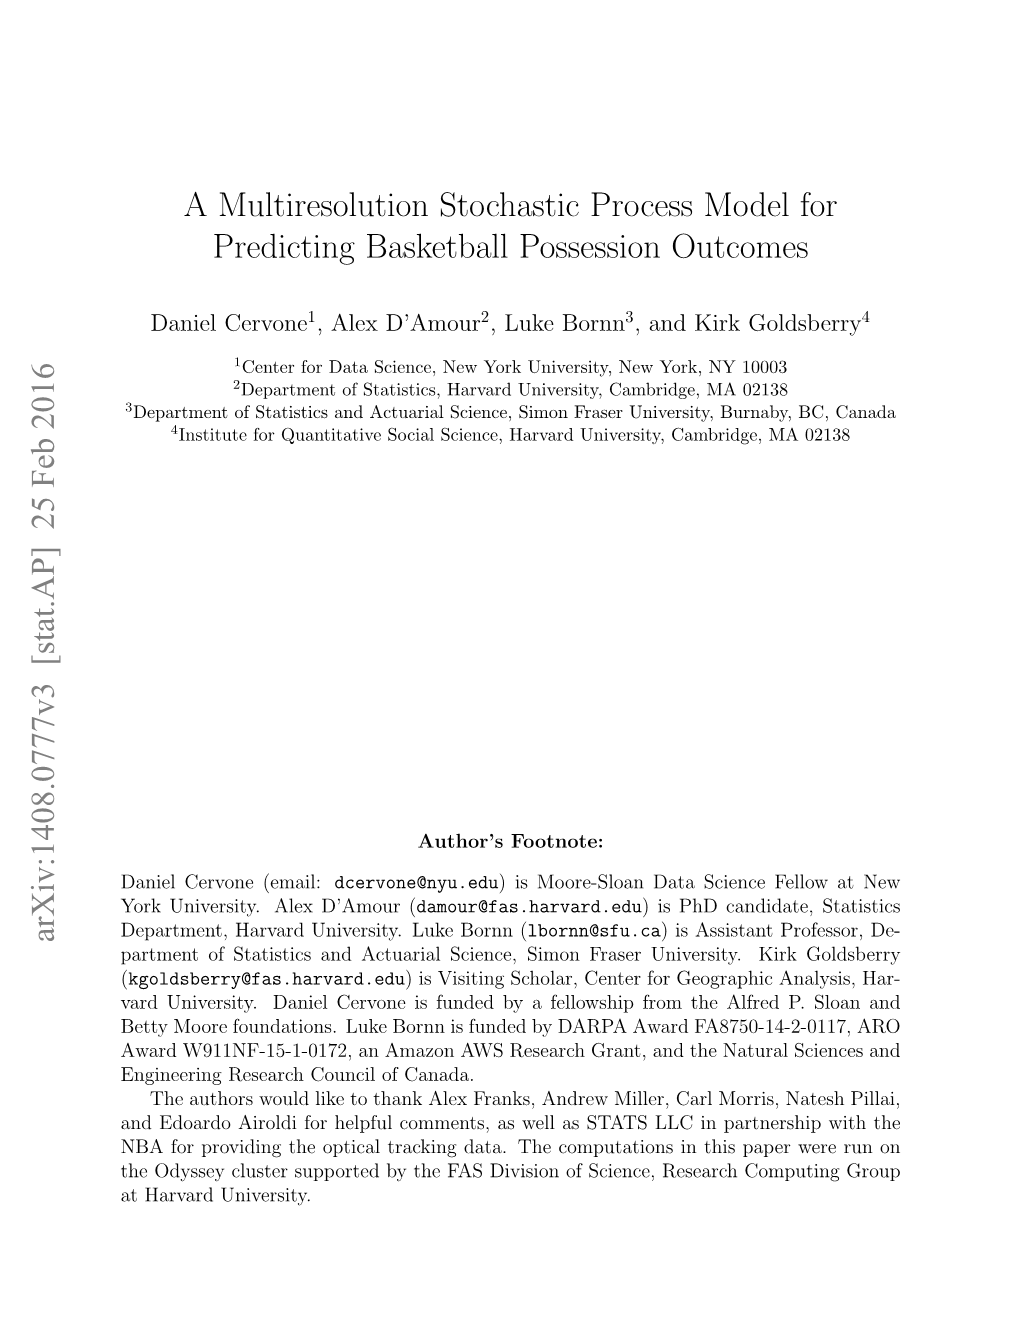 A Multiresolution Stochastic Process Model for Predicting Basketball Possession Outcomes